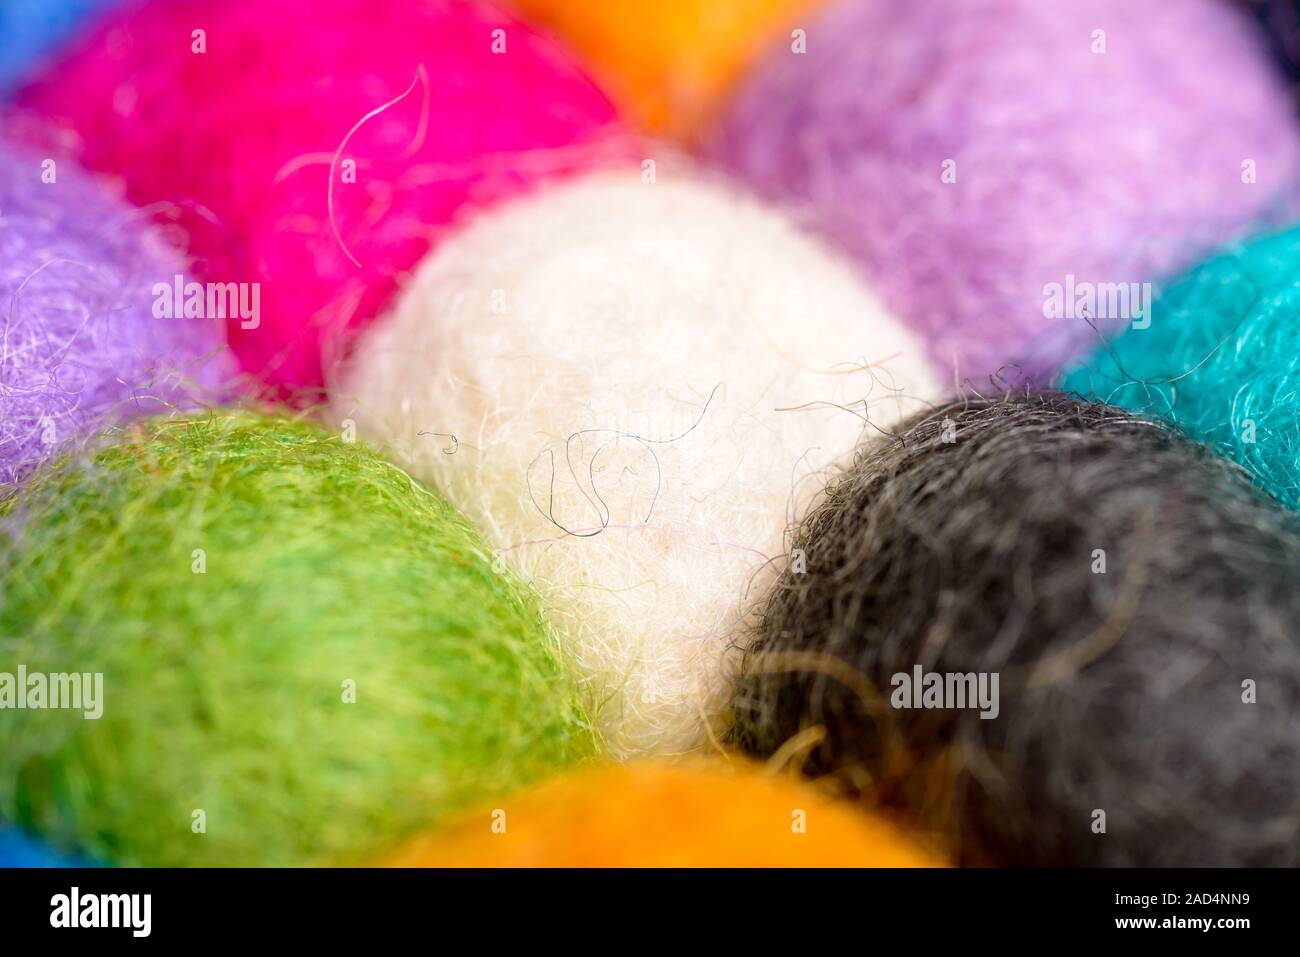 Background - Many Colorful Different Sized Colorful Cotton Balls Stock  Photo, Picture and Royalty Free Image. Image 16297727.